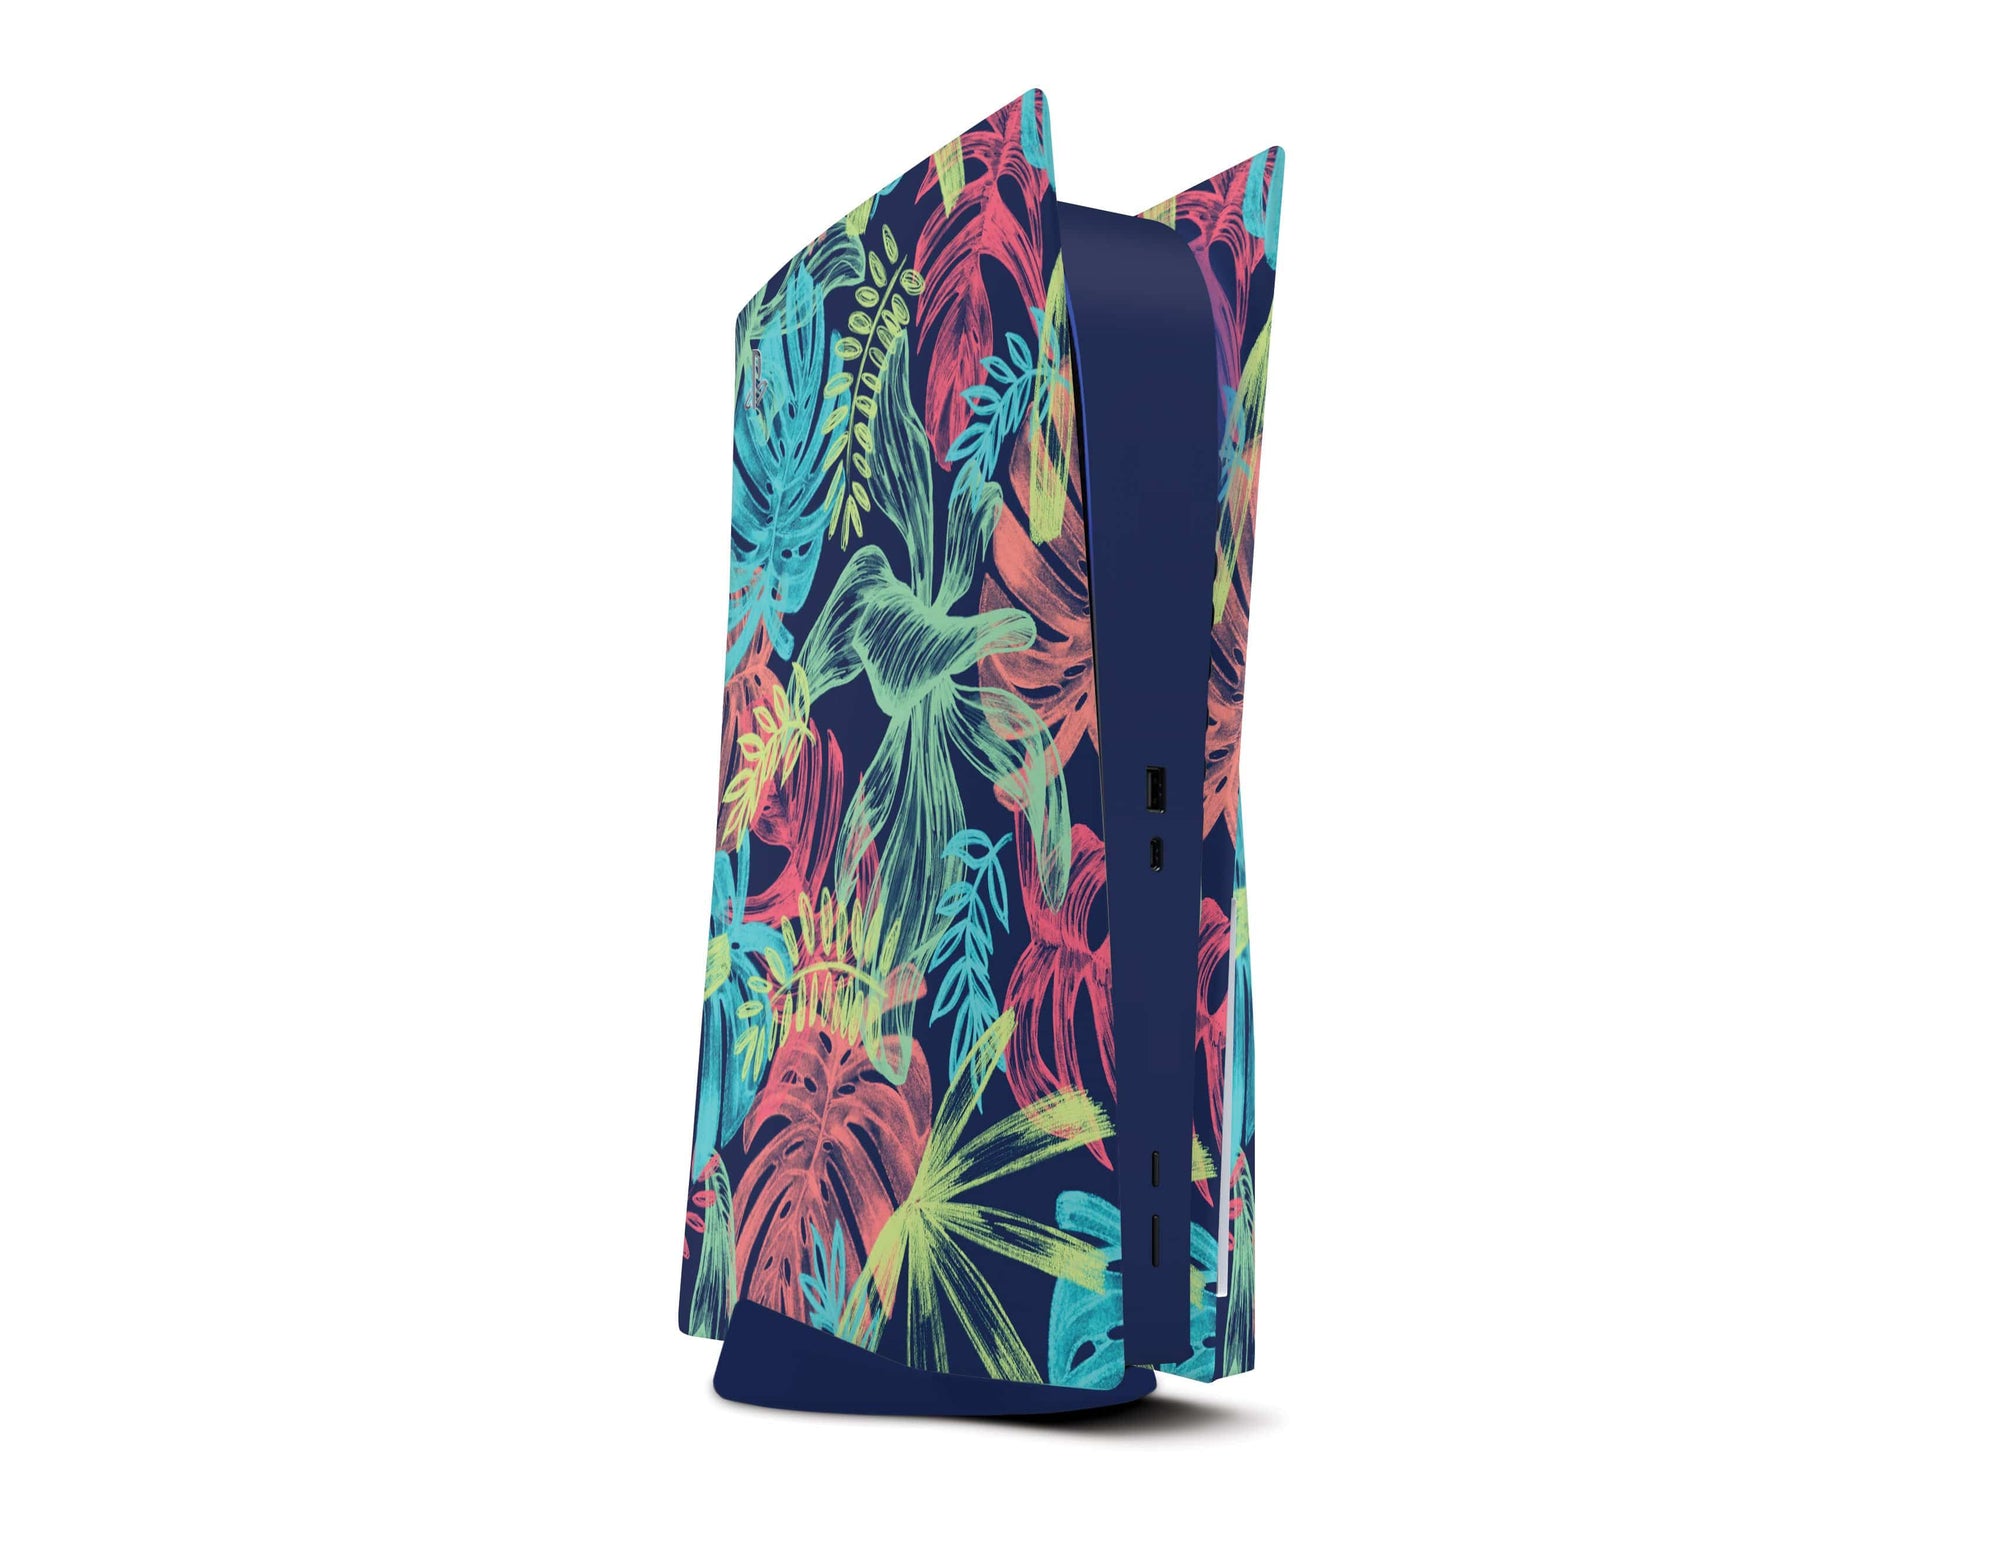 Neon Tropical PS5 Disc Edition Skin - StickyBunny